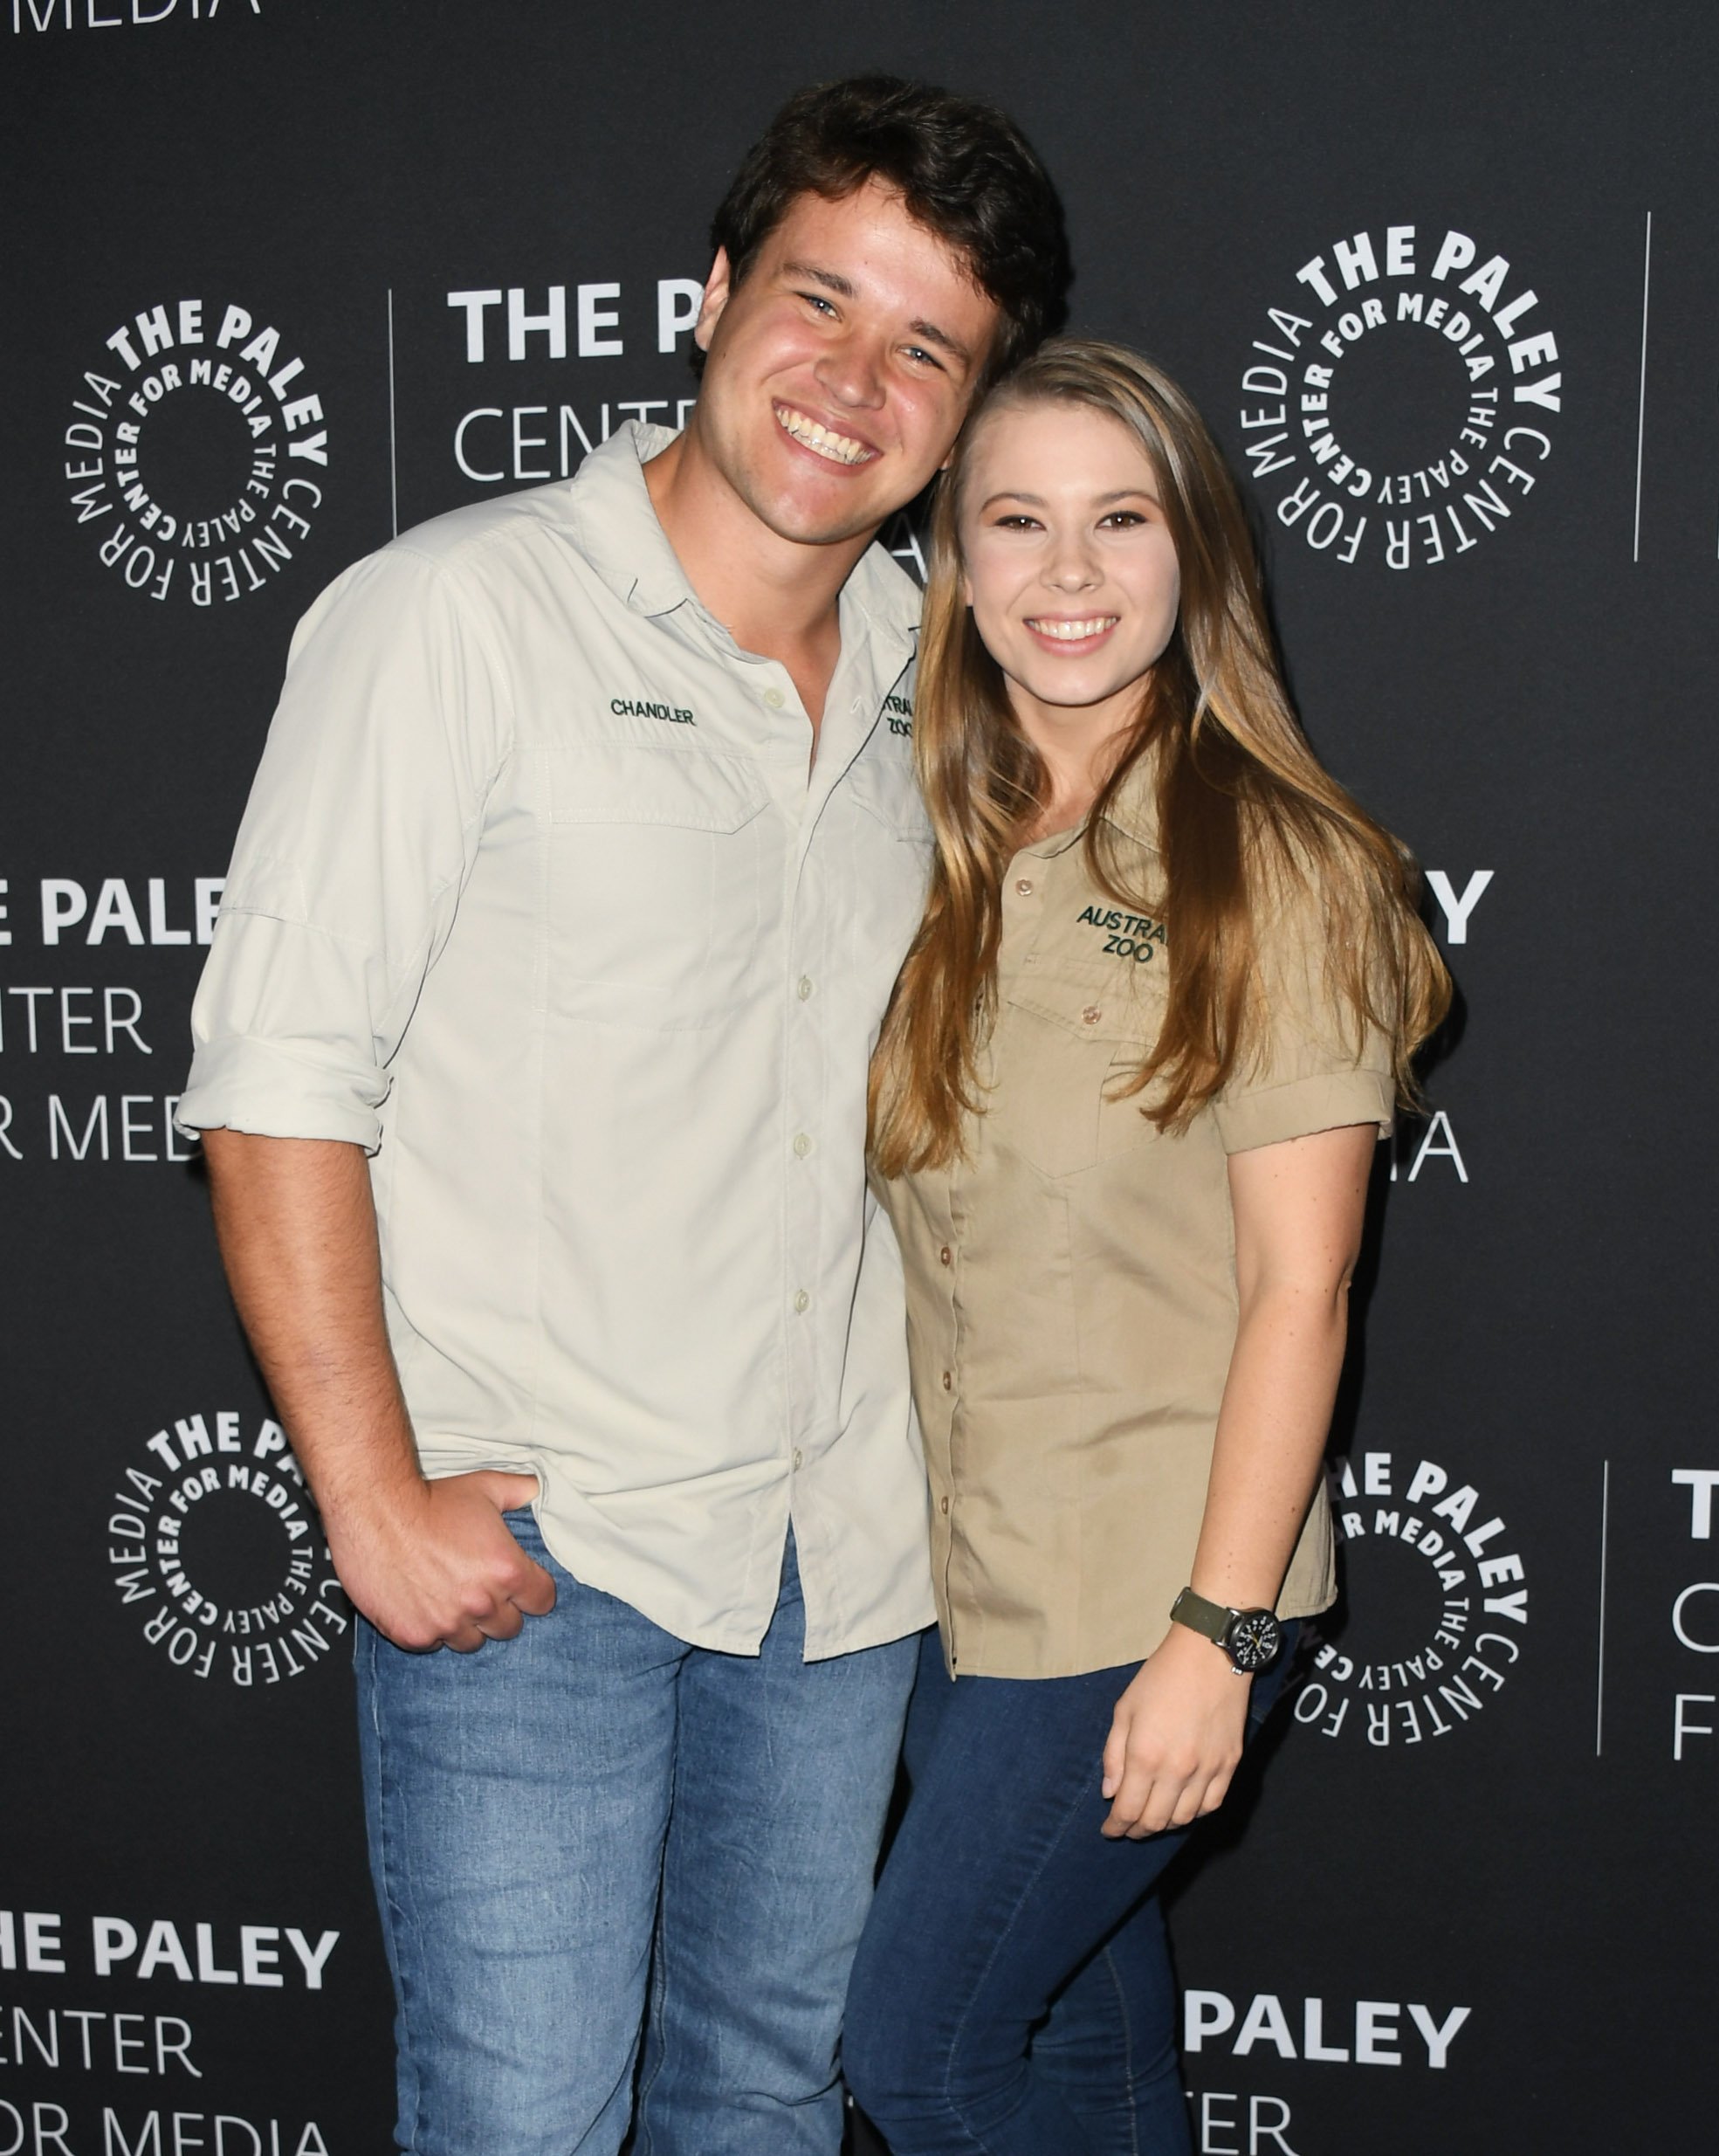 Chandler Powell and Bindi Irwin at The Paley Center For Media Presents: An Evening With The Irwins: "Crikey! It's The Irwins" Screening And Conversation at The Paley Center for Media in Beverly Hills, California | Photo: Jon Kopaloff/Getty Images